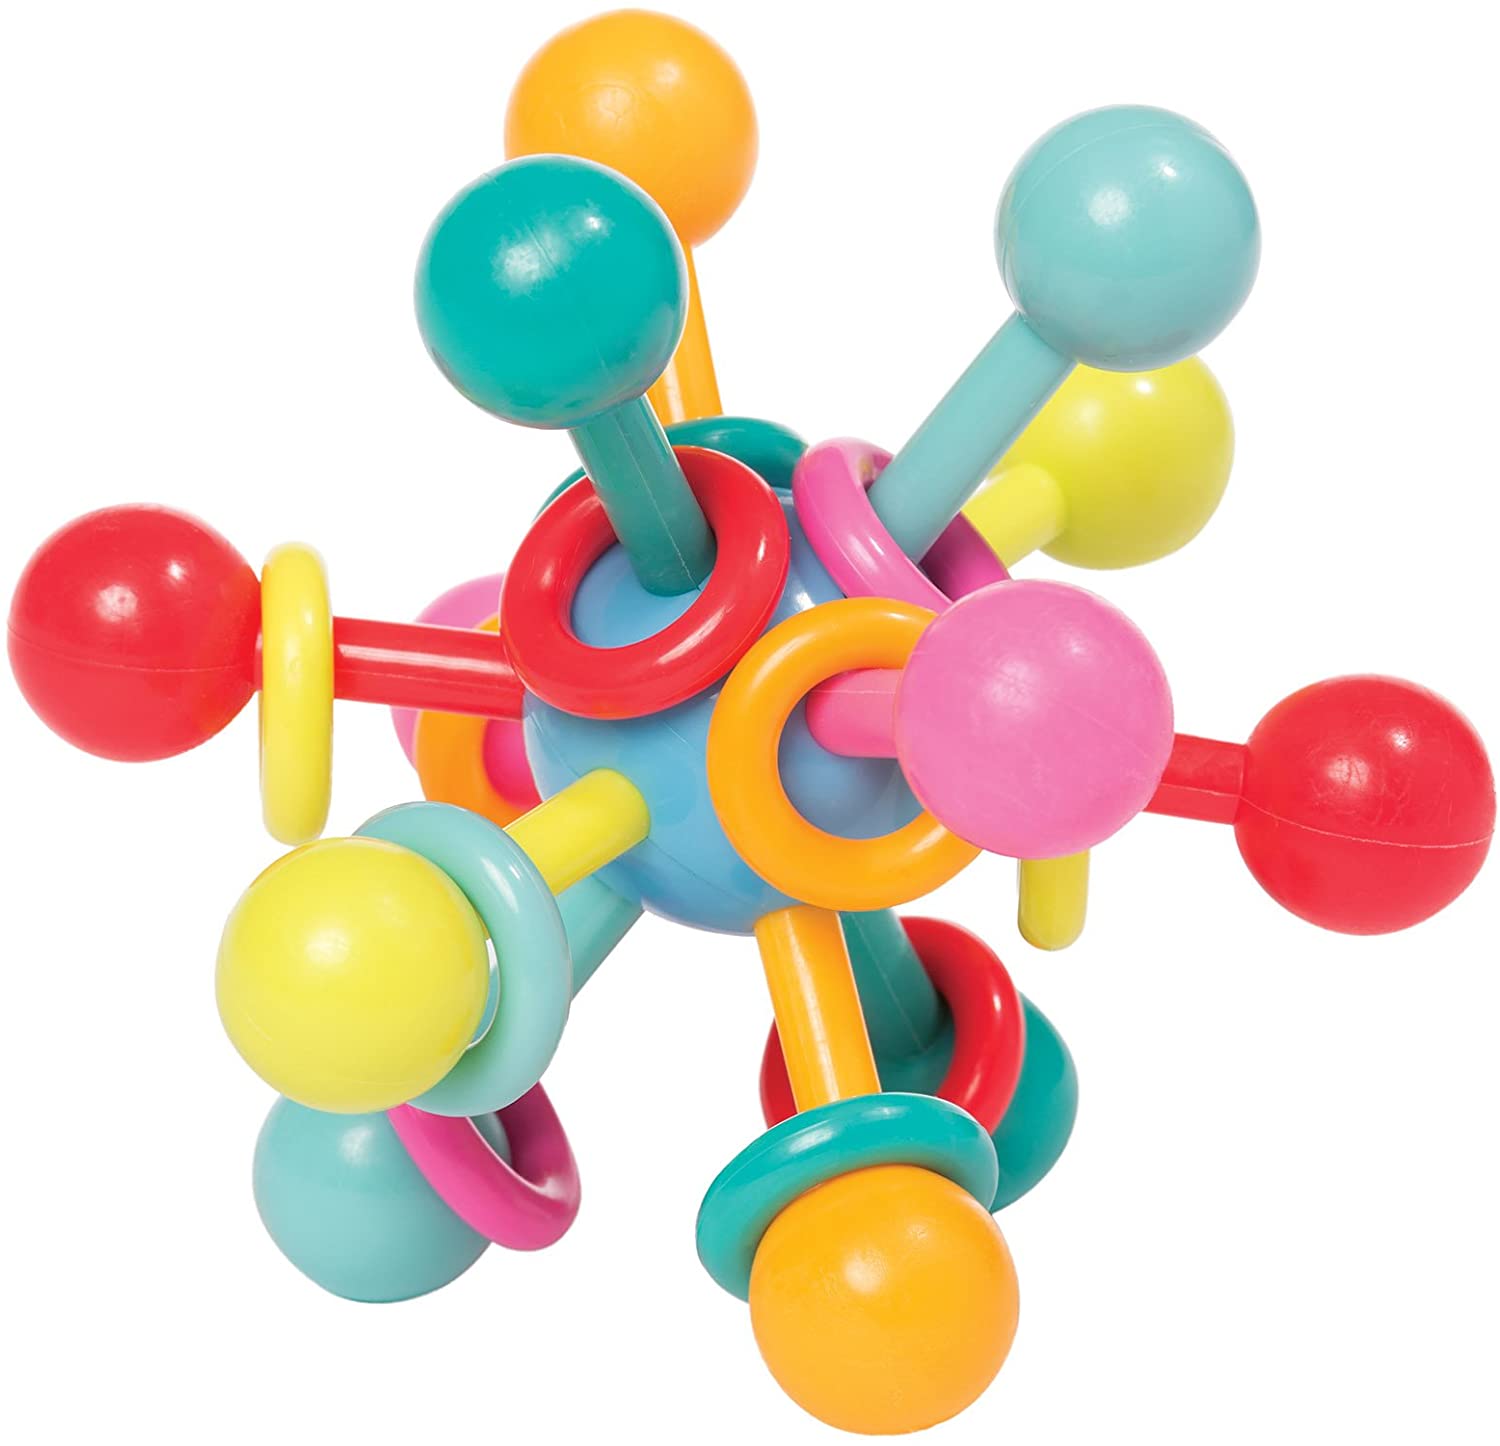 Manhattan Toy Atom Teether Toy - ANB Baby -Infant